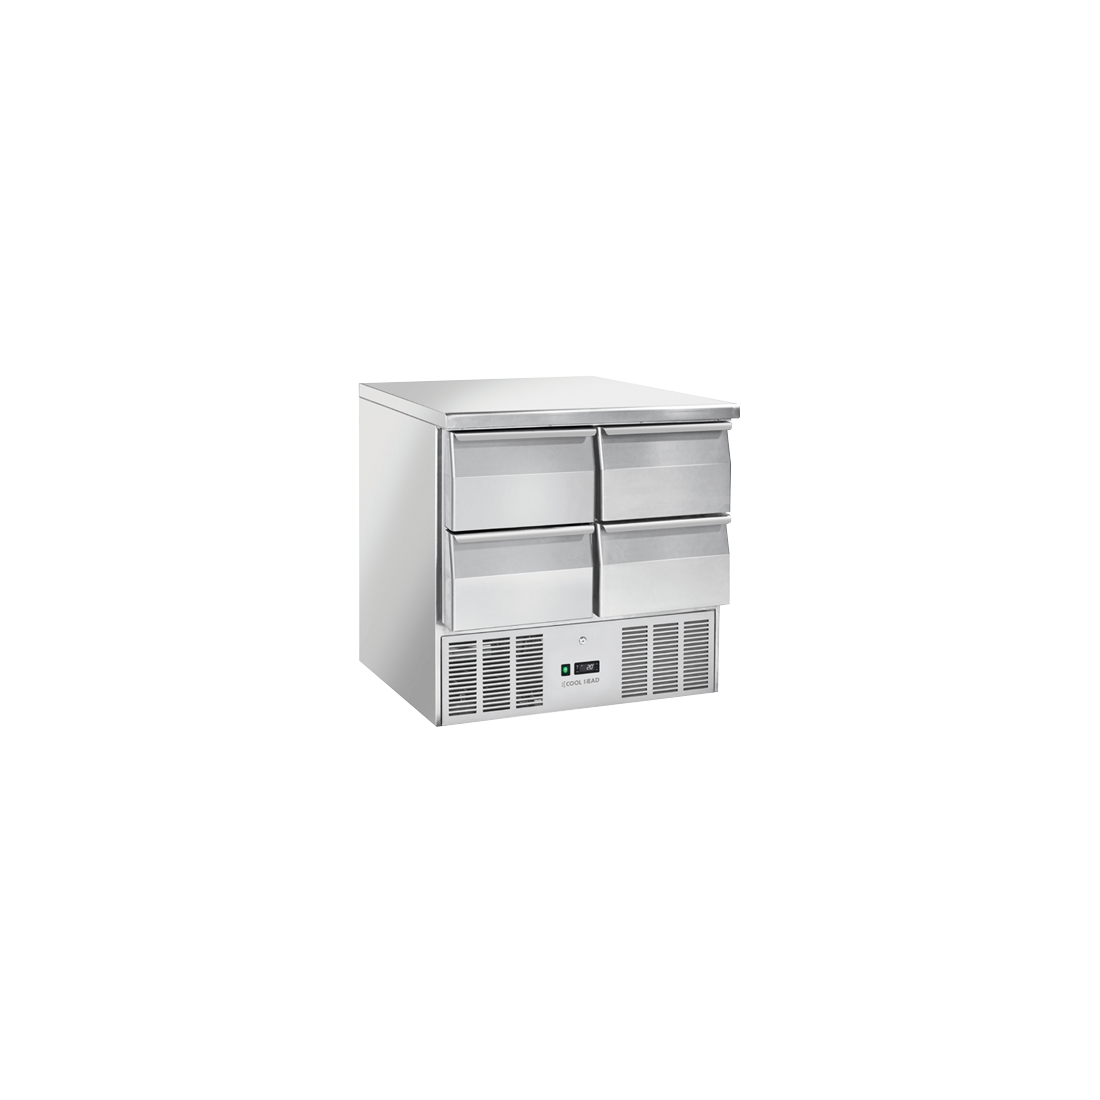 COOL HEAD ,CRD94, Refrigerated Preparation Saladette with 4 Drawers